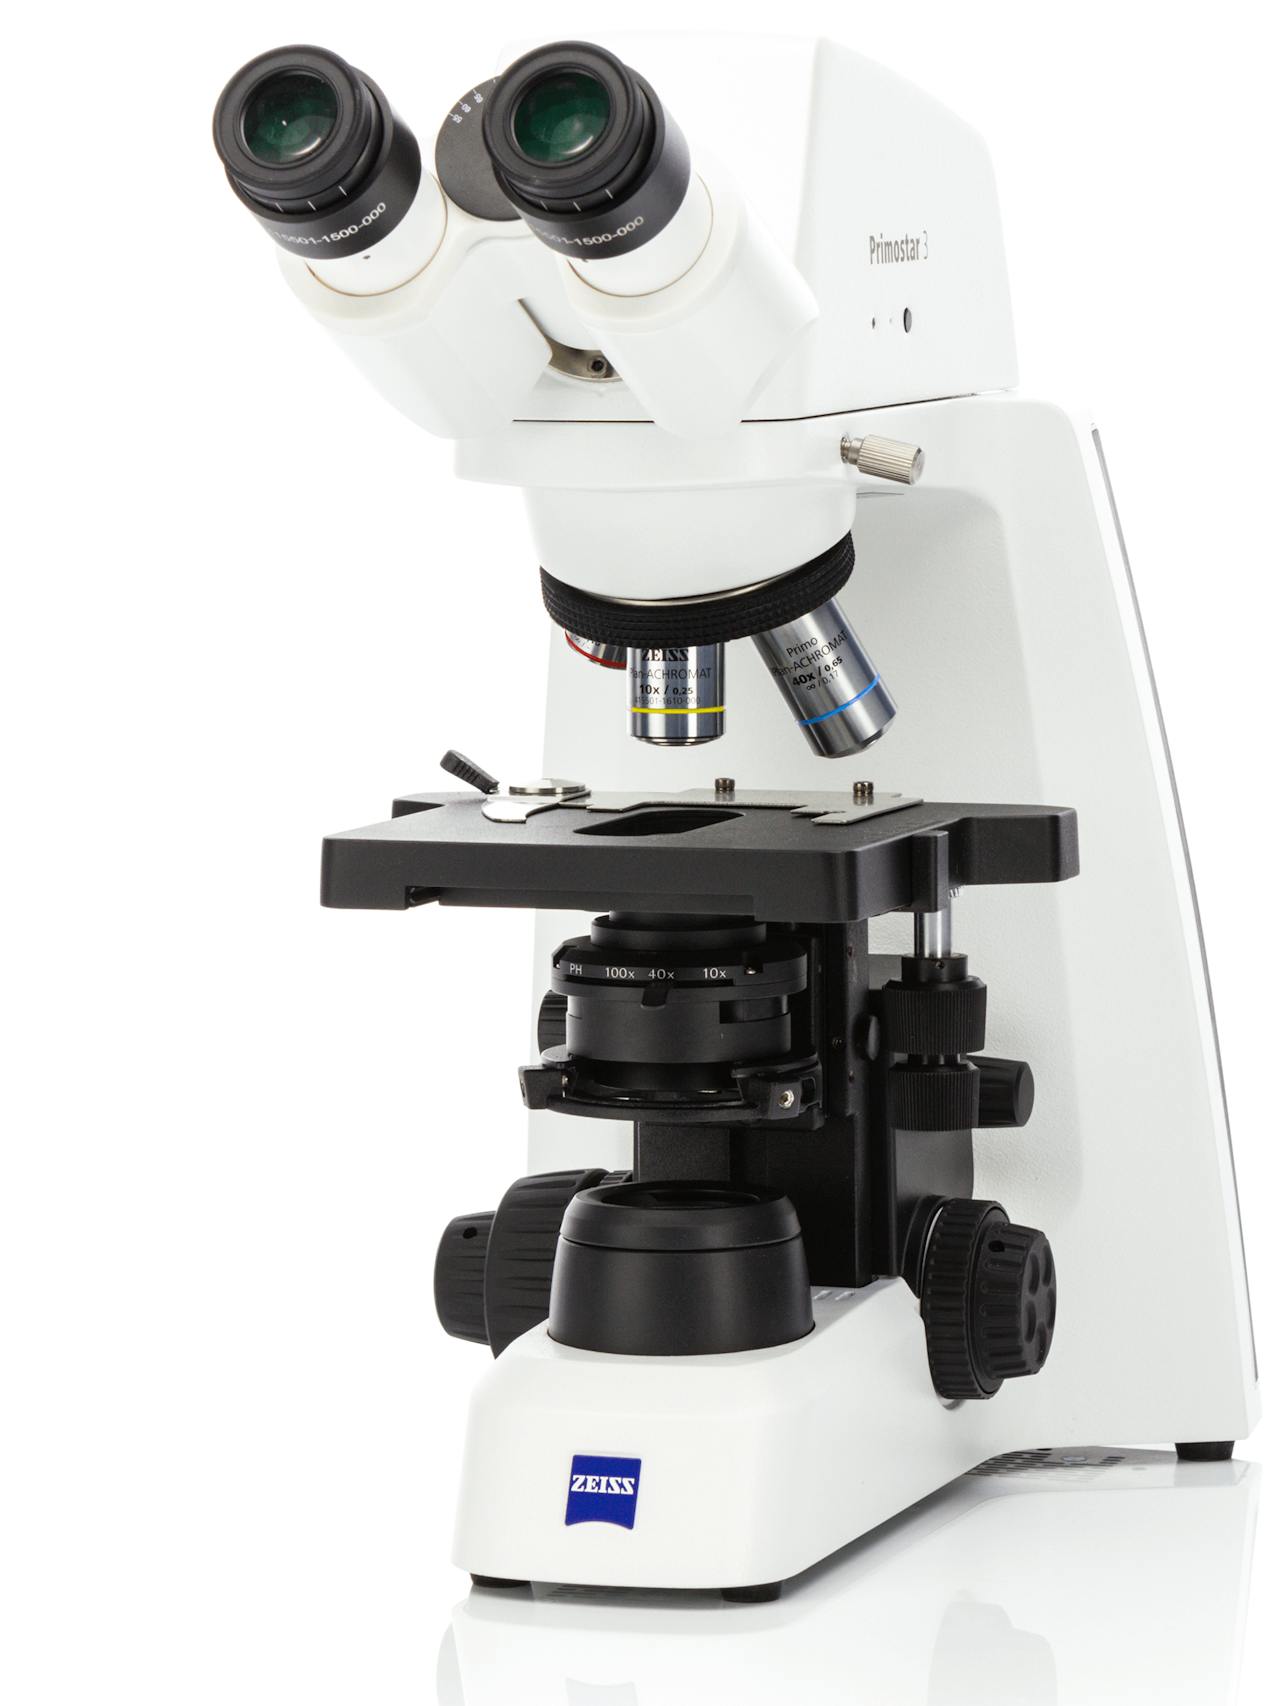 Useless ventilation curse ZEISS Primostar 3 – Your compact microscope for education and routine